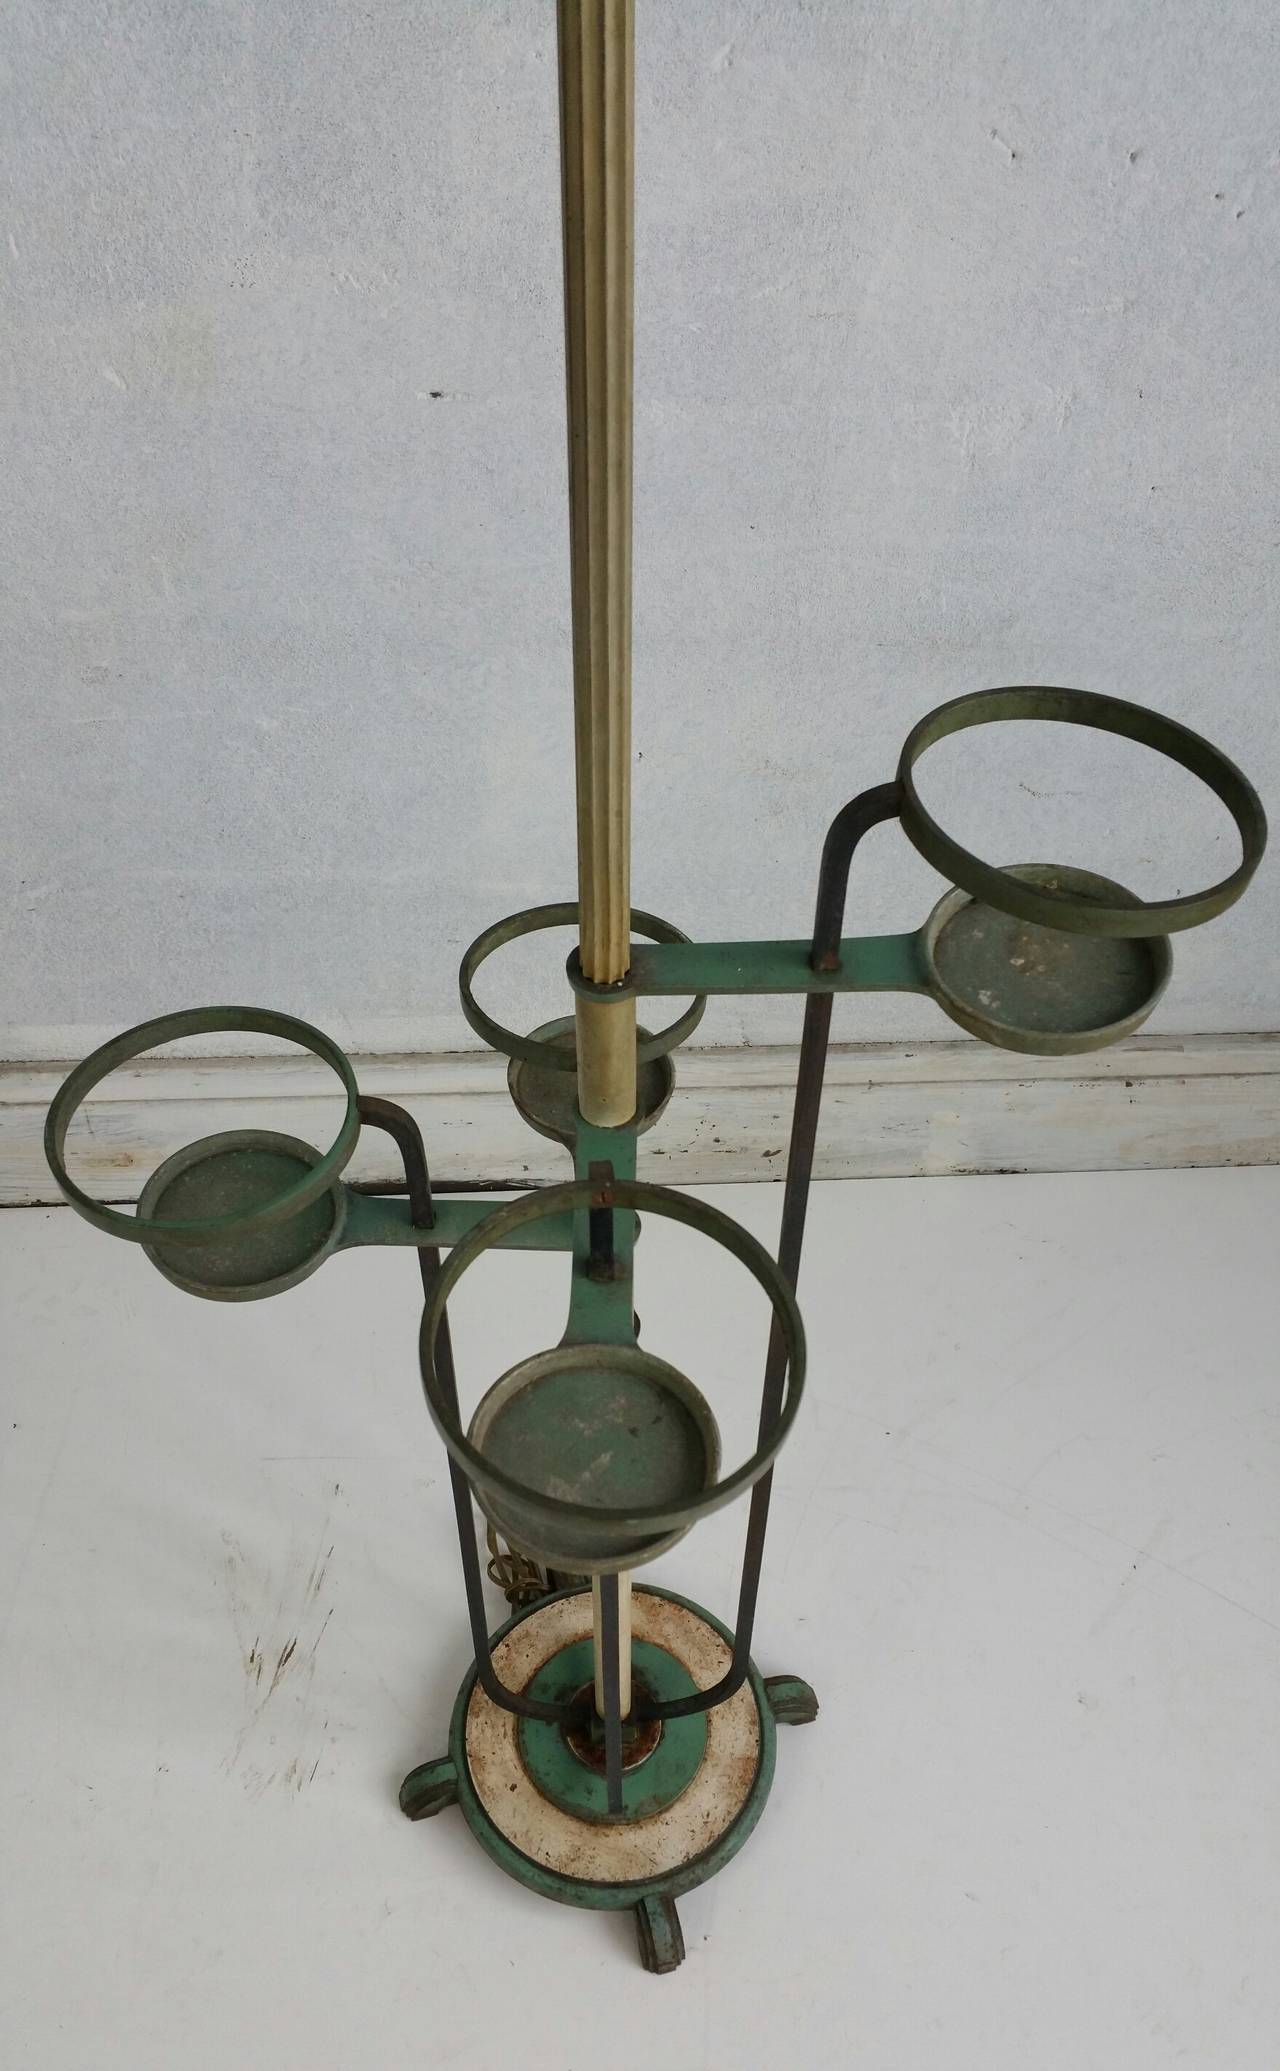 American Unusual Art Deco Floor Lamp in Aluminum, Brass and Iron, circa Late 1920s For Sale